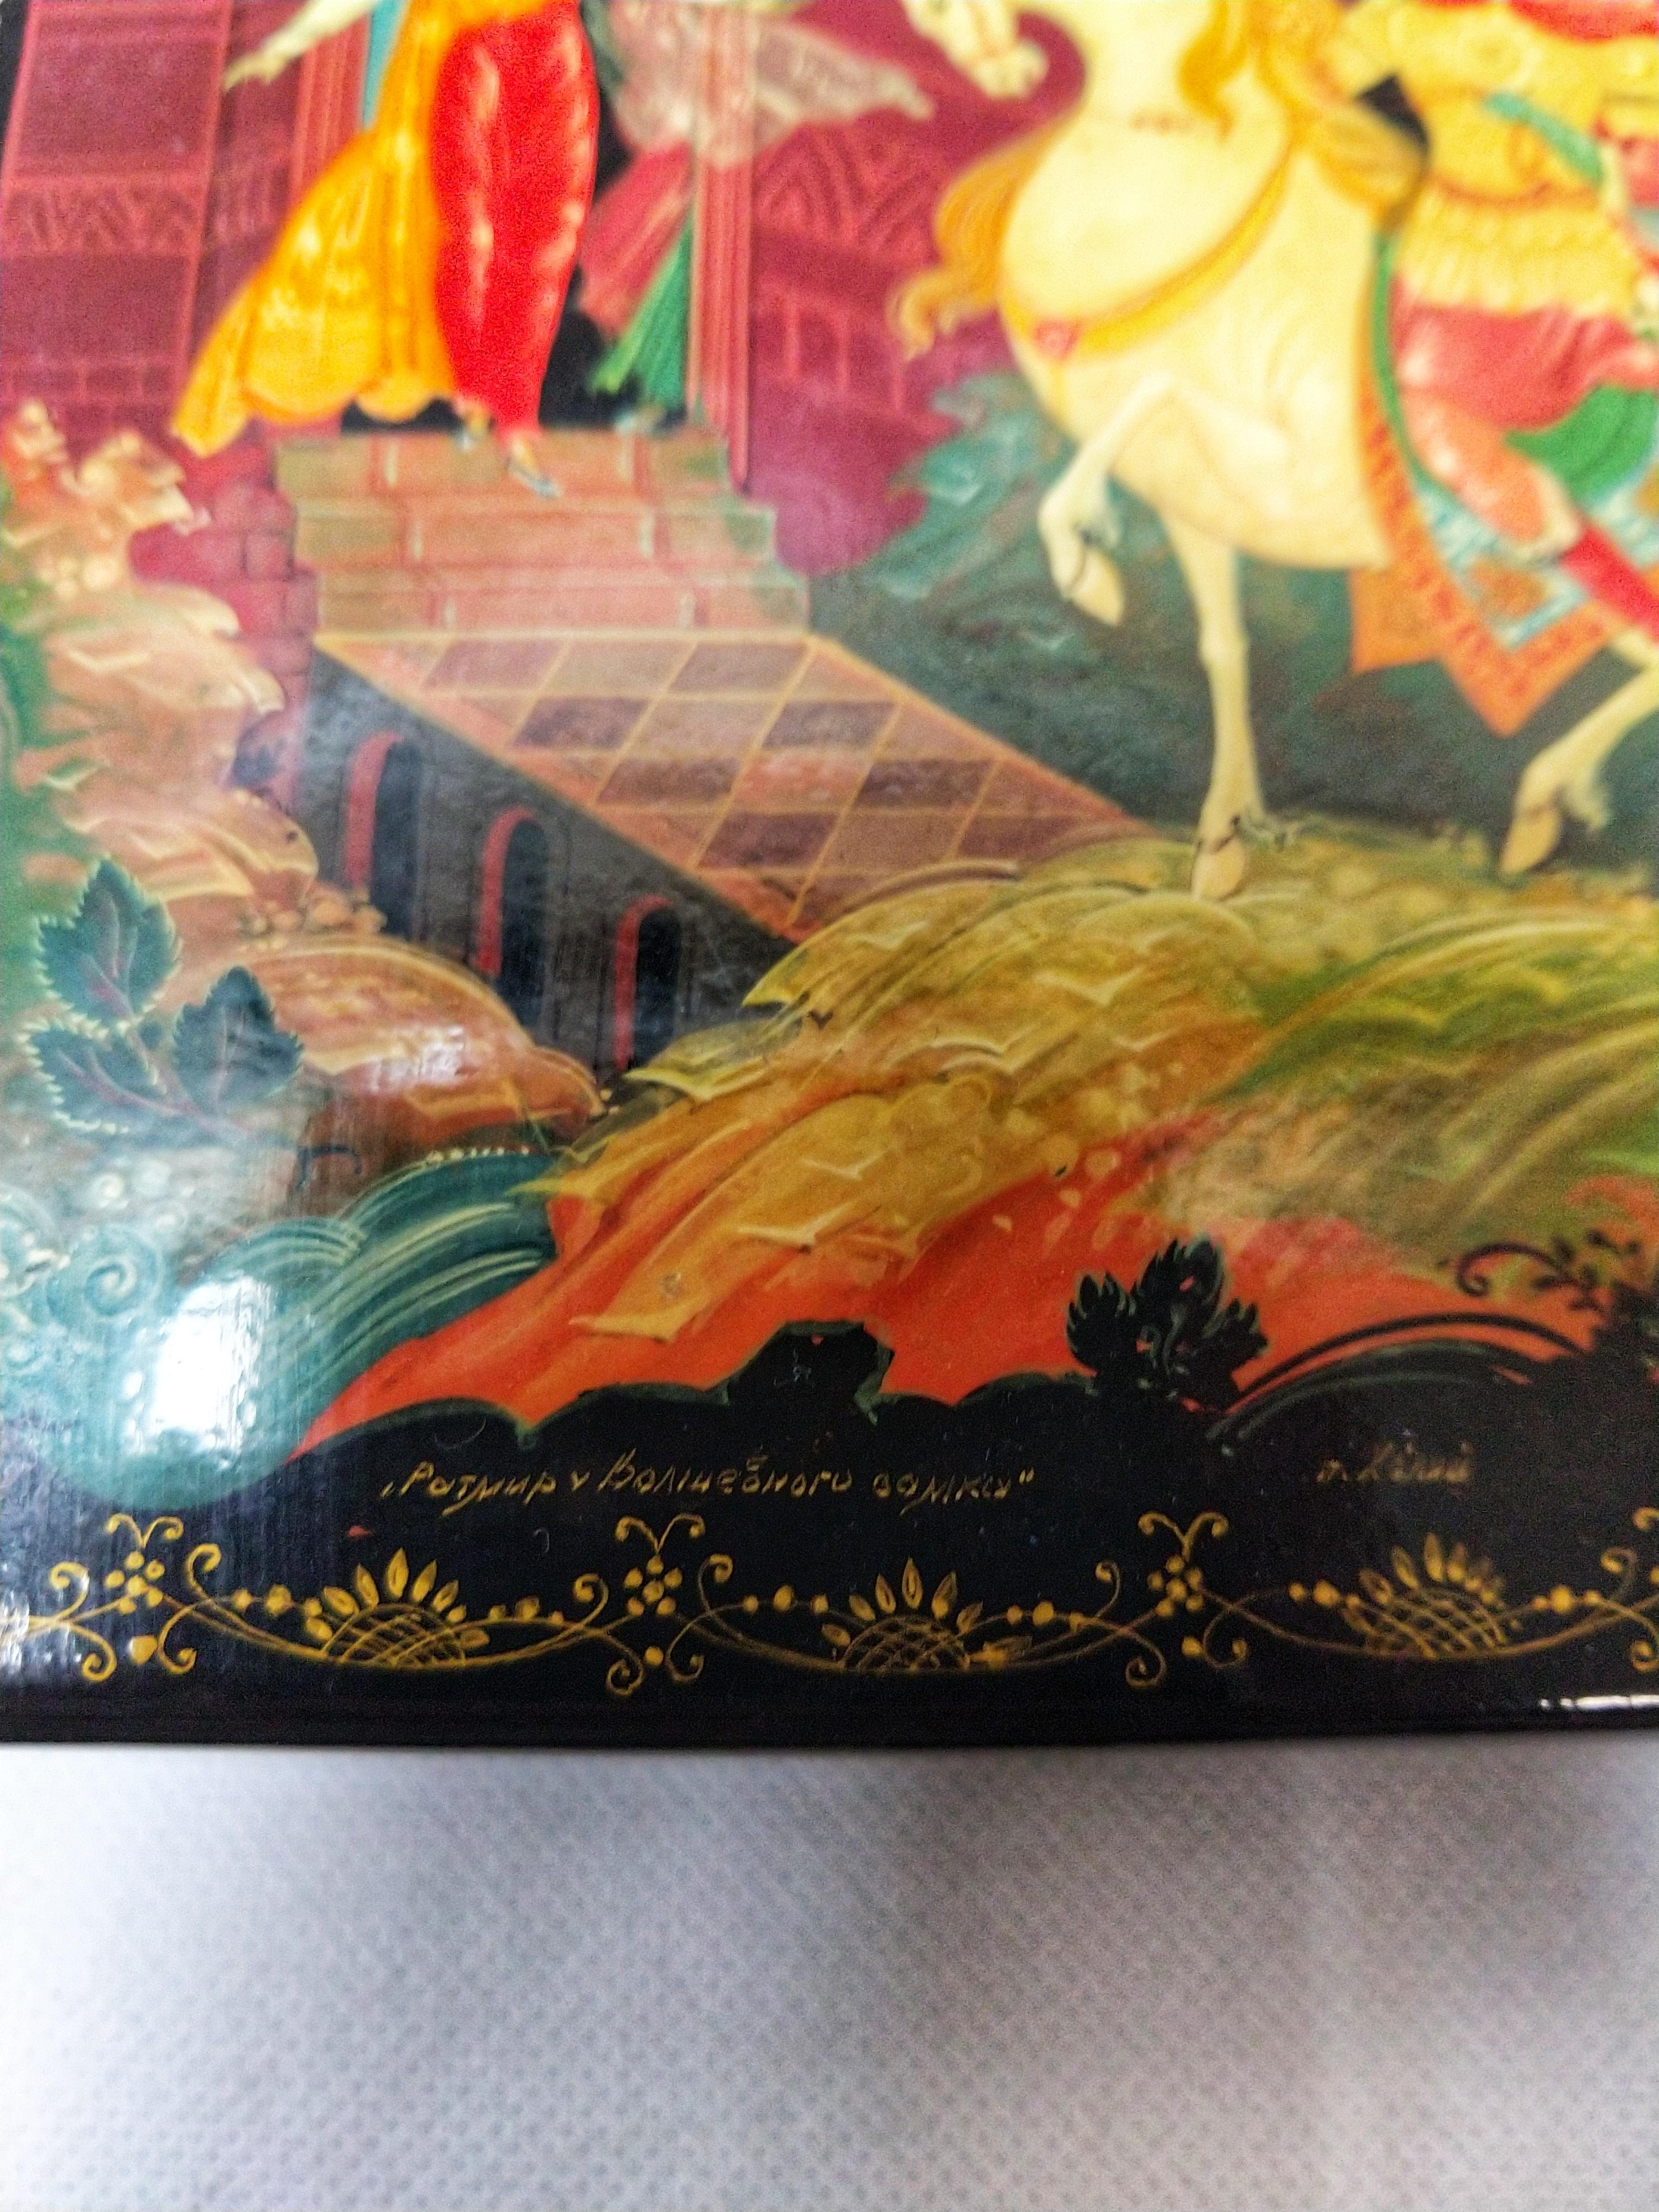 Exceptional lacquered and hand painted Russian box. The image depicts the return of the knight to his castle, with his beloved welcoming him with open arms and with festive motives for his return. Note the fabulous colors.

These hand painted